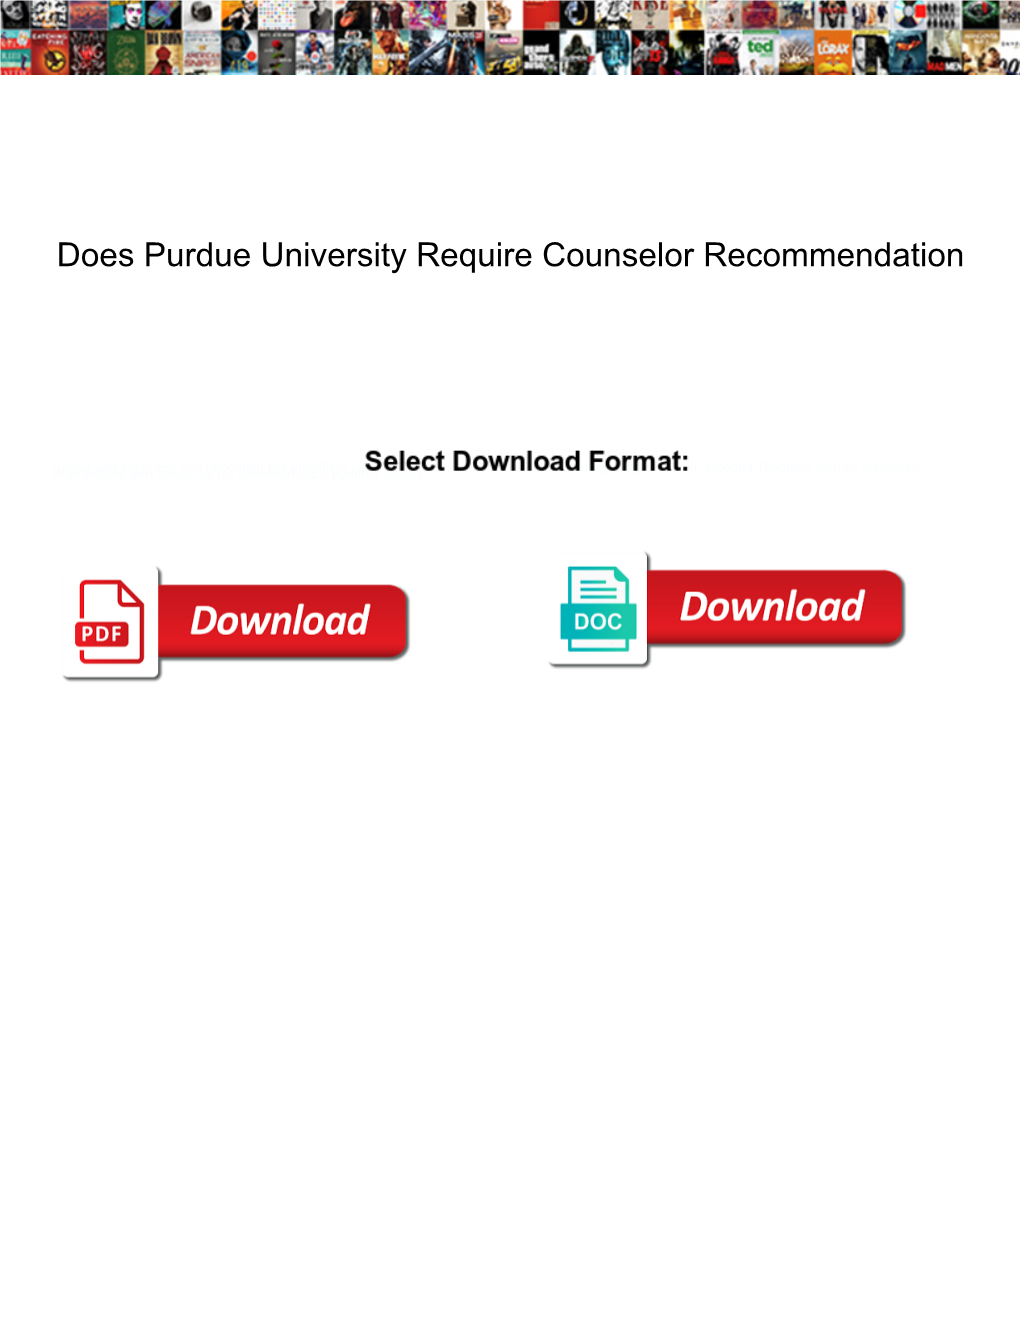 Does Purdue University Require Counselor Recommendation